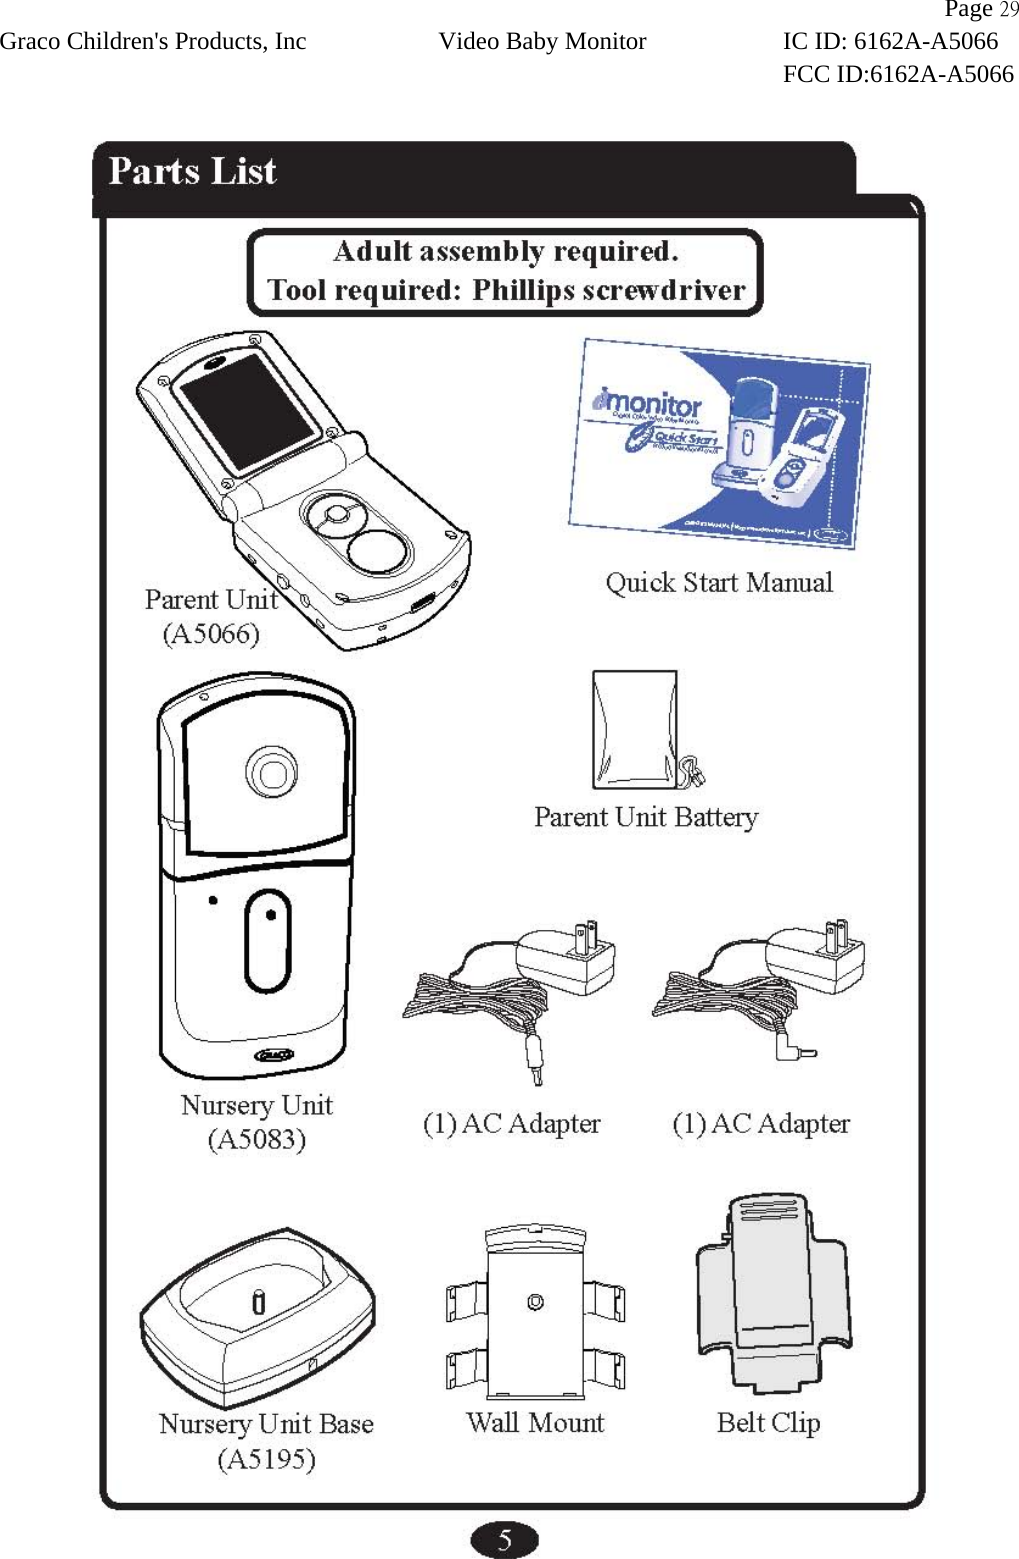                Page 29 Graco Children&apos;s Products, Inc Video Baby Monitor IC ID: 6162A-A5066 FCC ID:6162A-A5066   